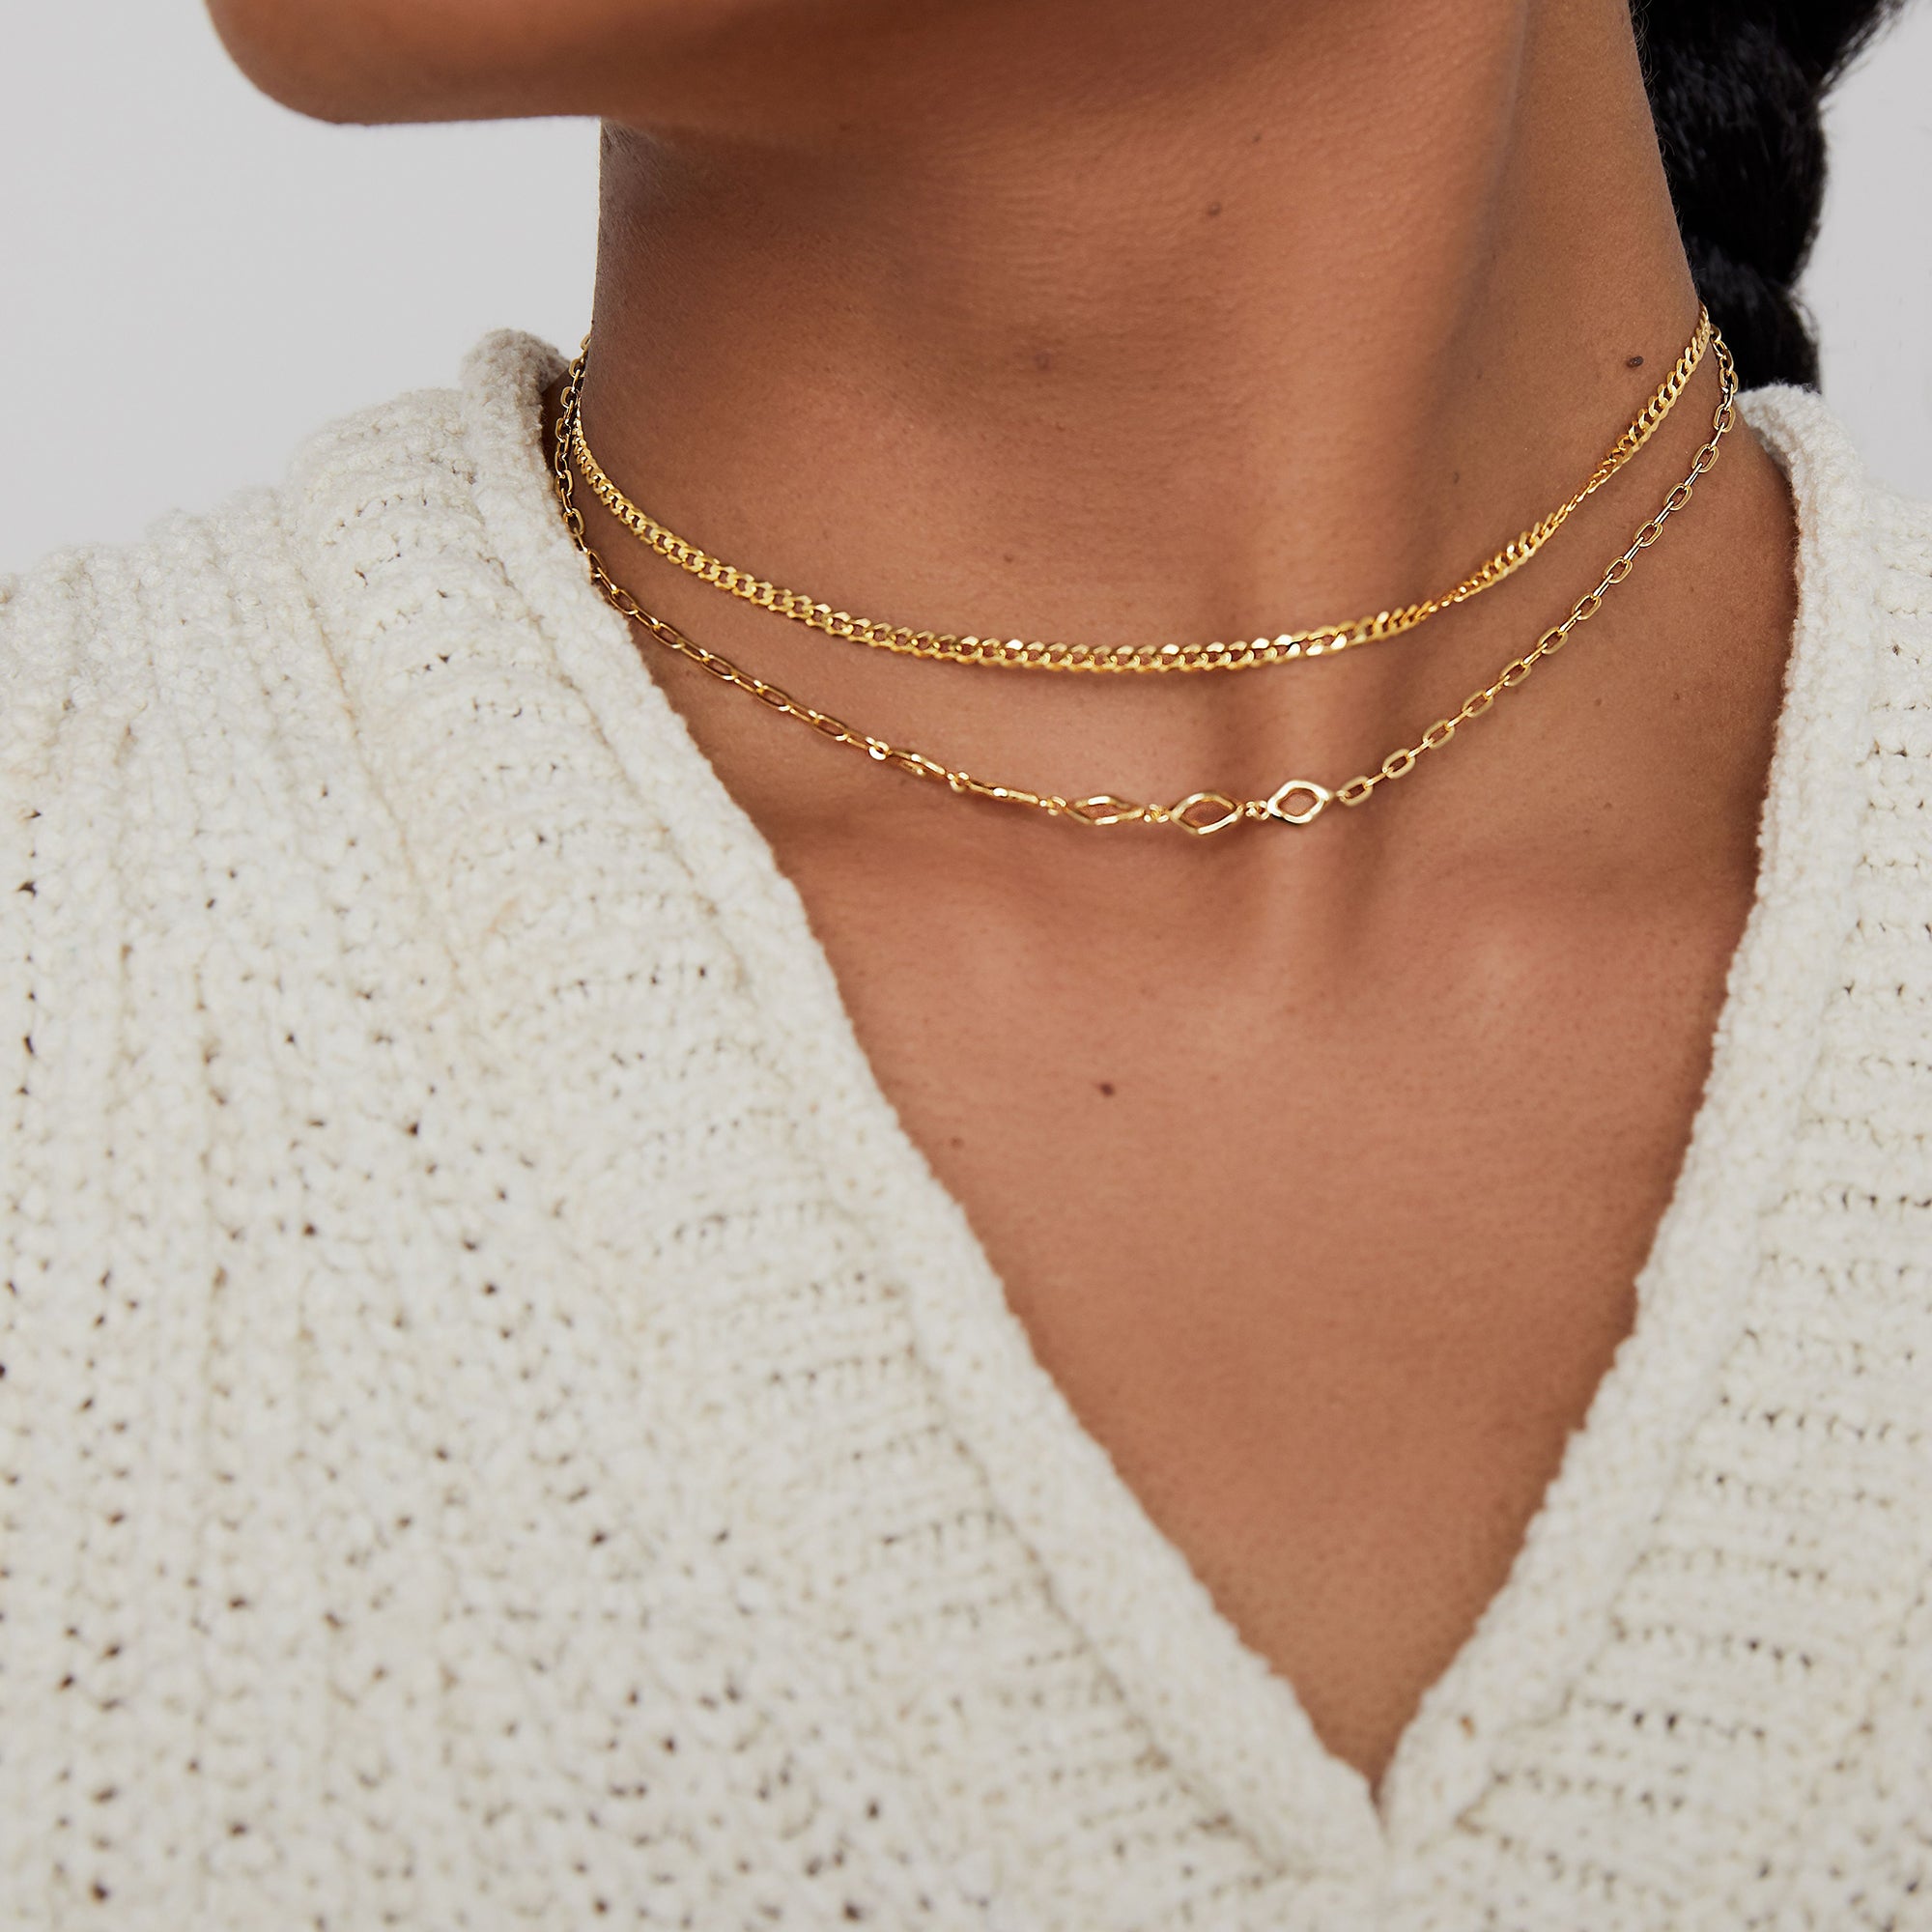 THE DULCE CHAIN NECKLACE